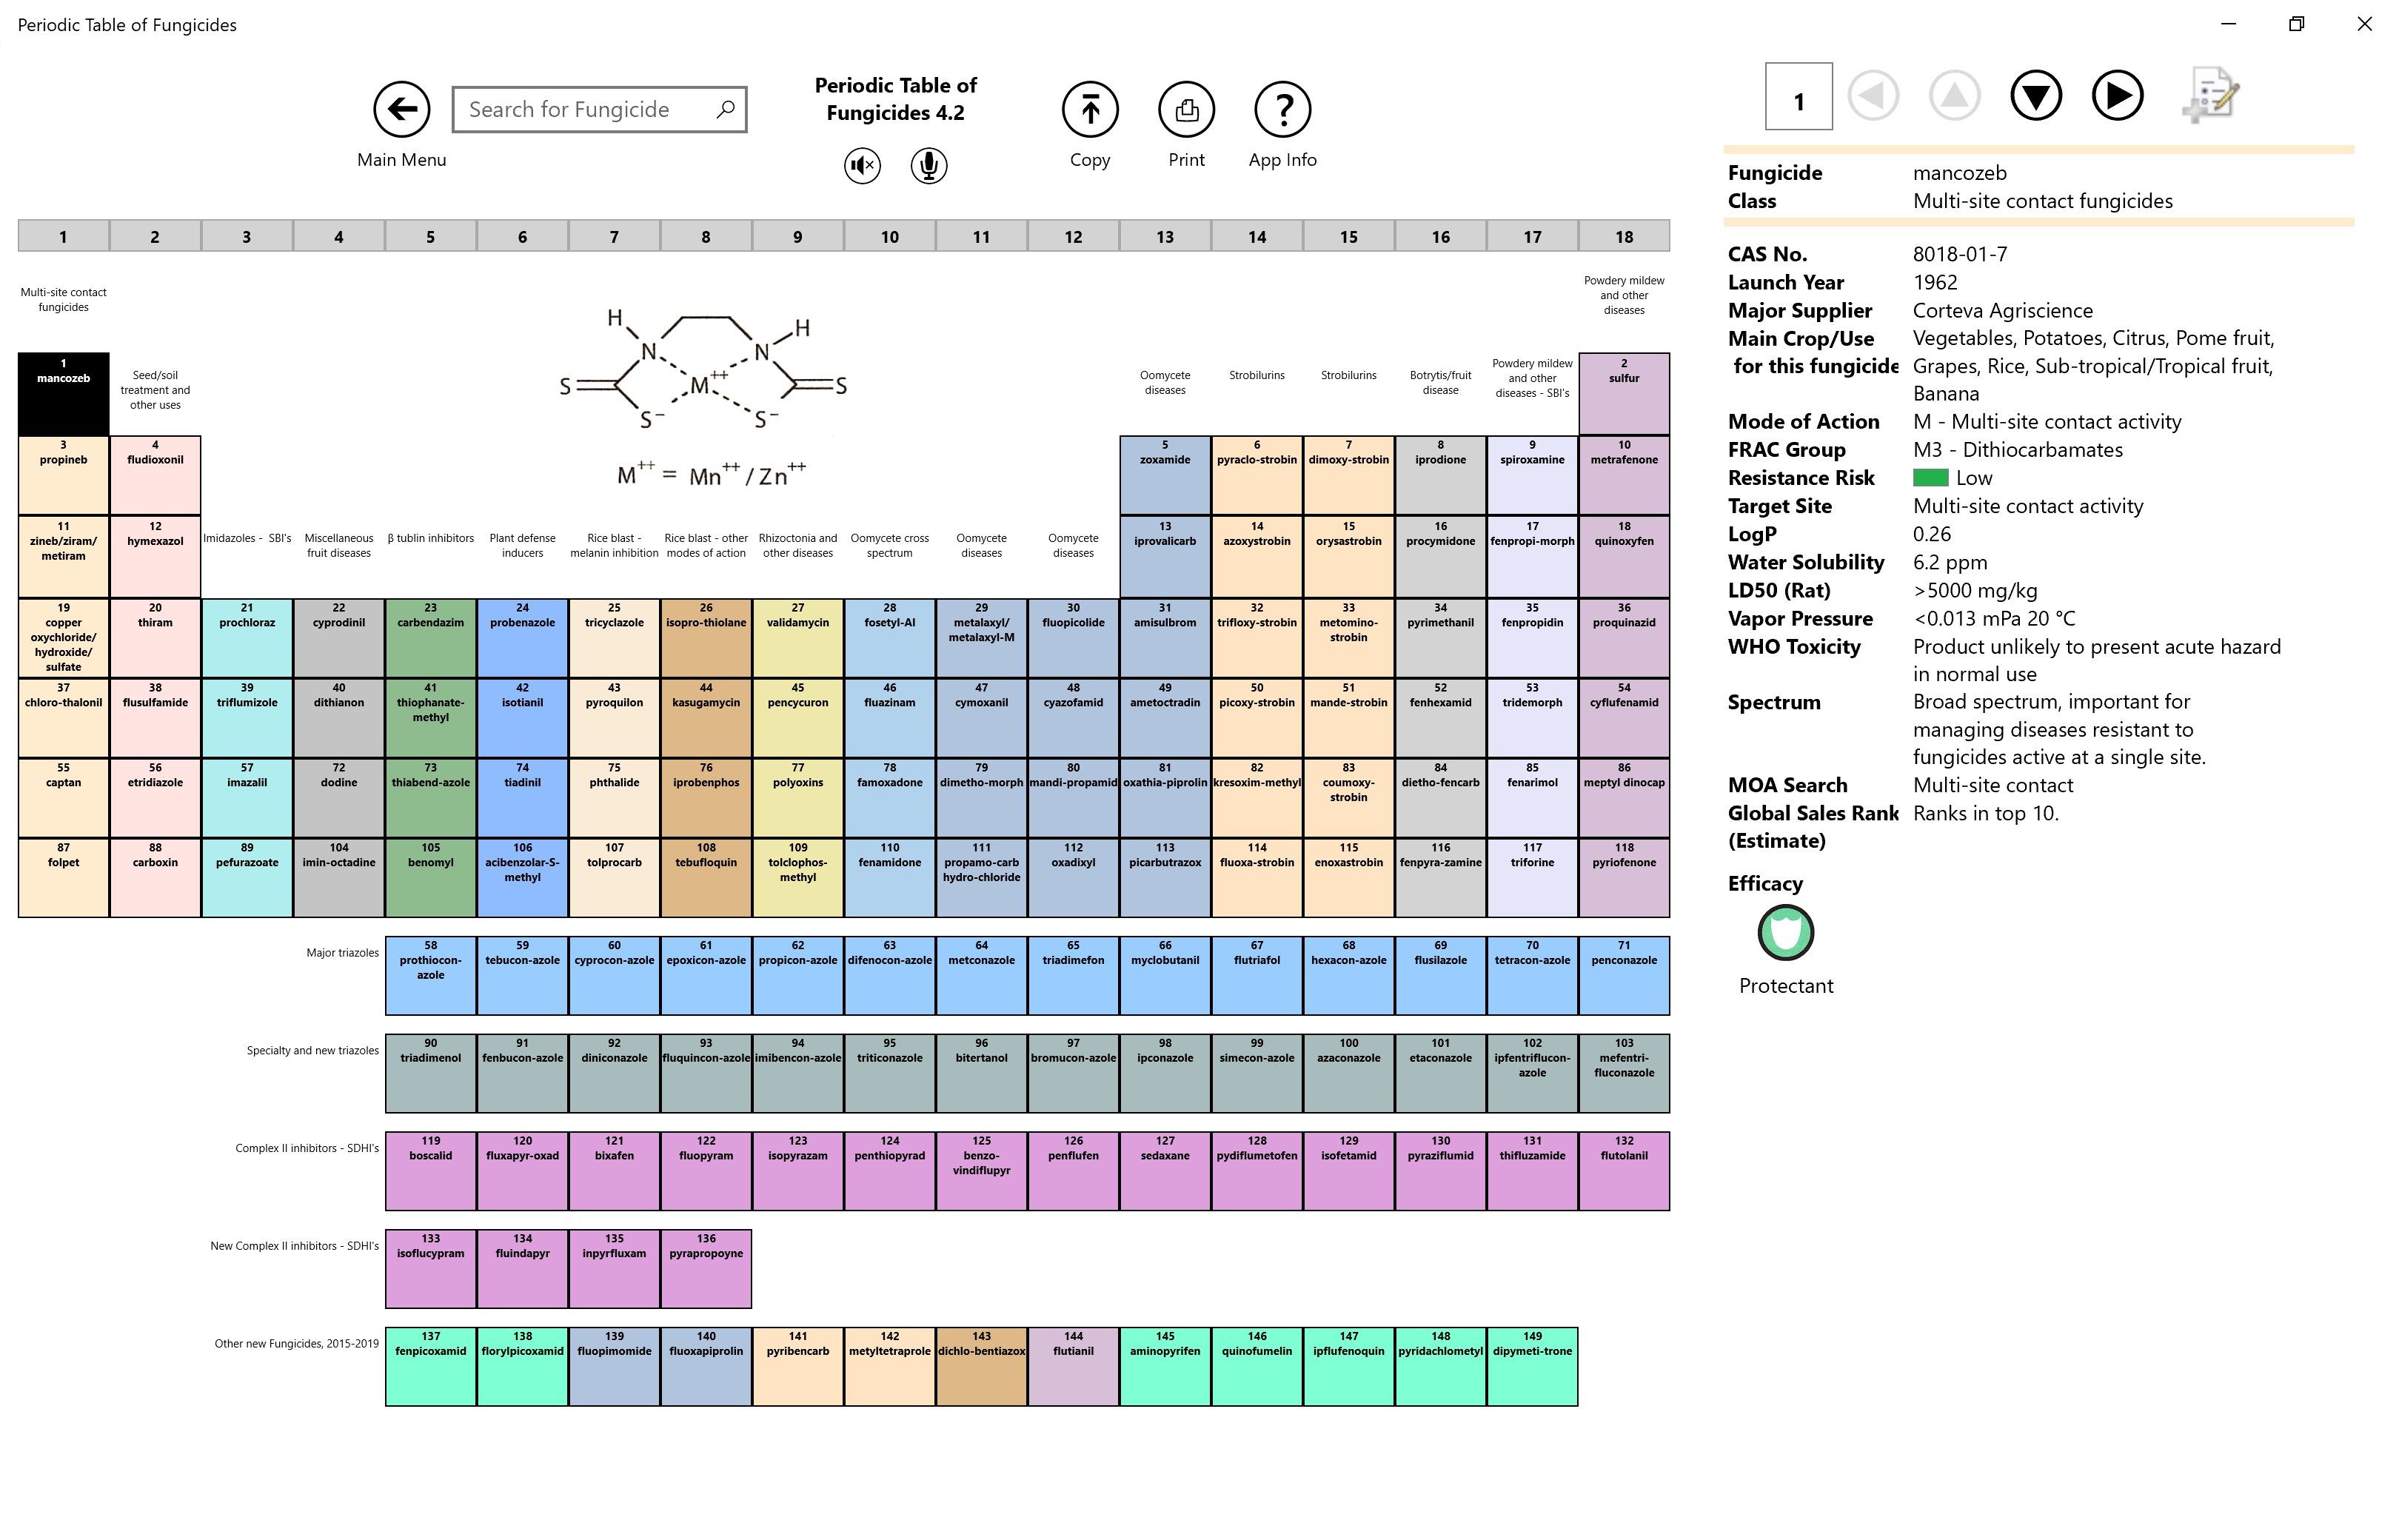 This is the view of the Periodic Table of Fungicides with the selected fungicide highlighted with a black background with white colored text. The data for the fungicide is shown on the right side. At the top are buttons for displaying a quick fungicide search from an alphabetical list, displaying legend information and other buttons for exporting and printing of the Table and Data. A fungicide is selected by touch, mouse and keyboard navigation.